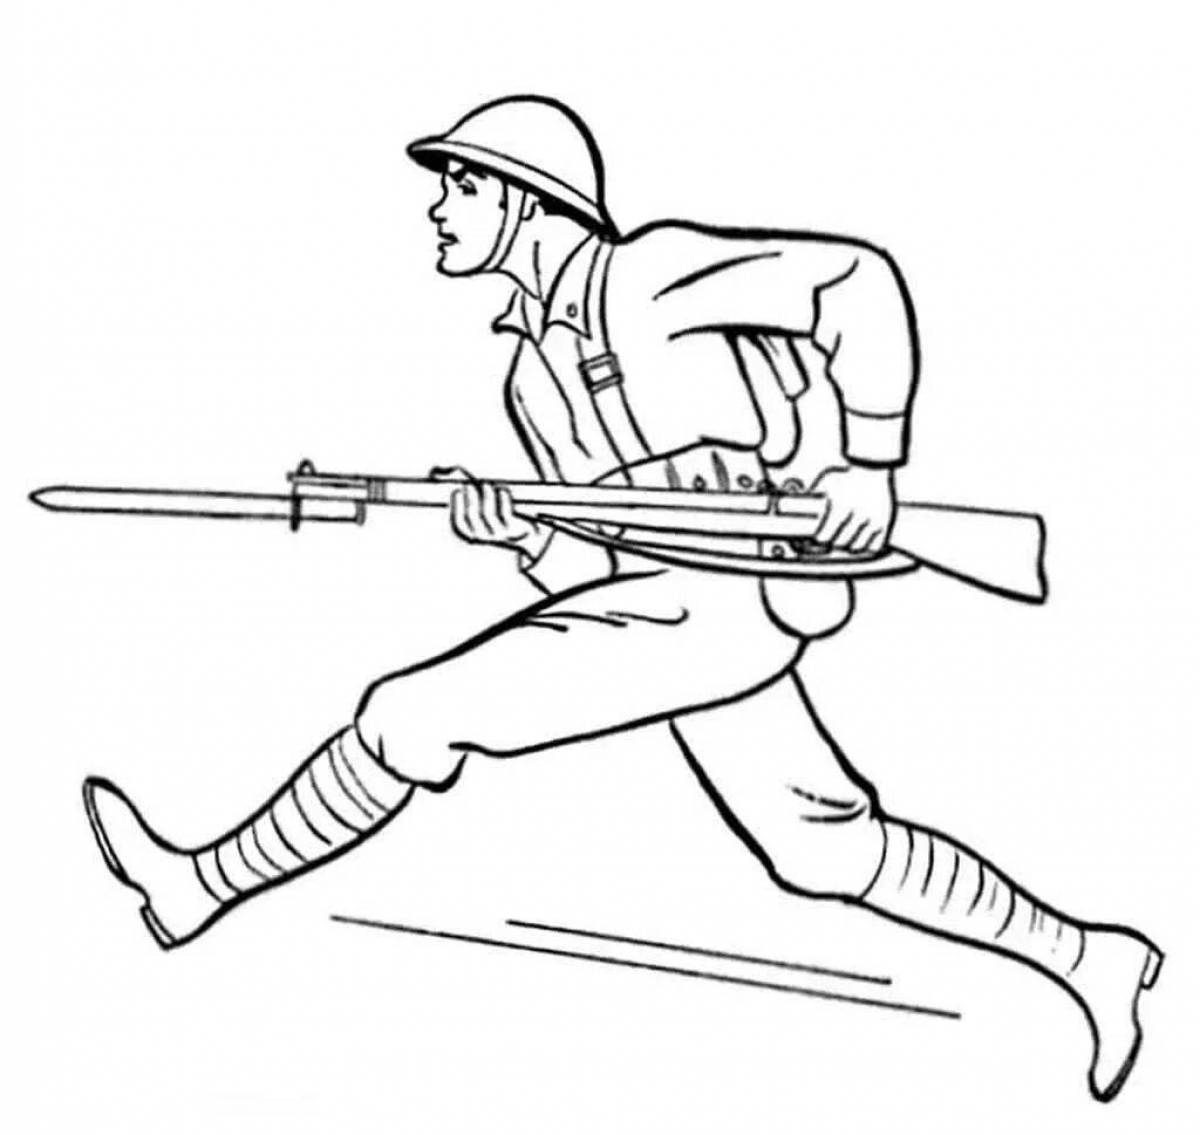 Exquisite soldier figurine coloring page